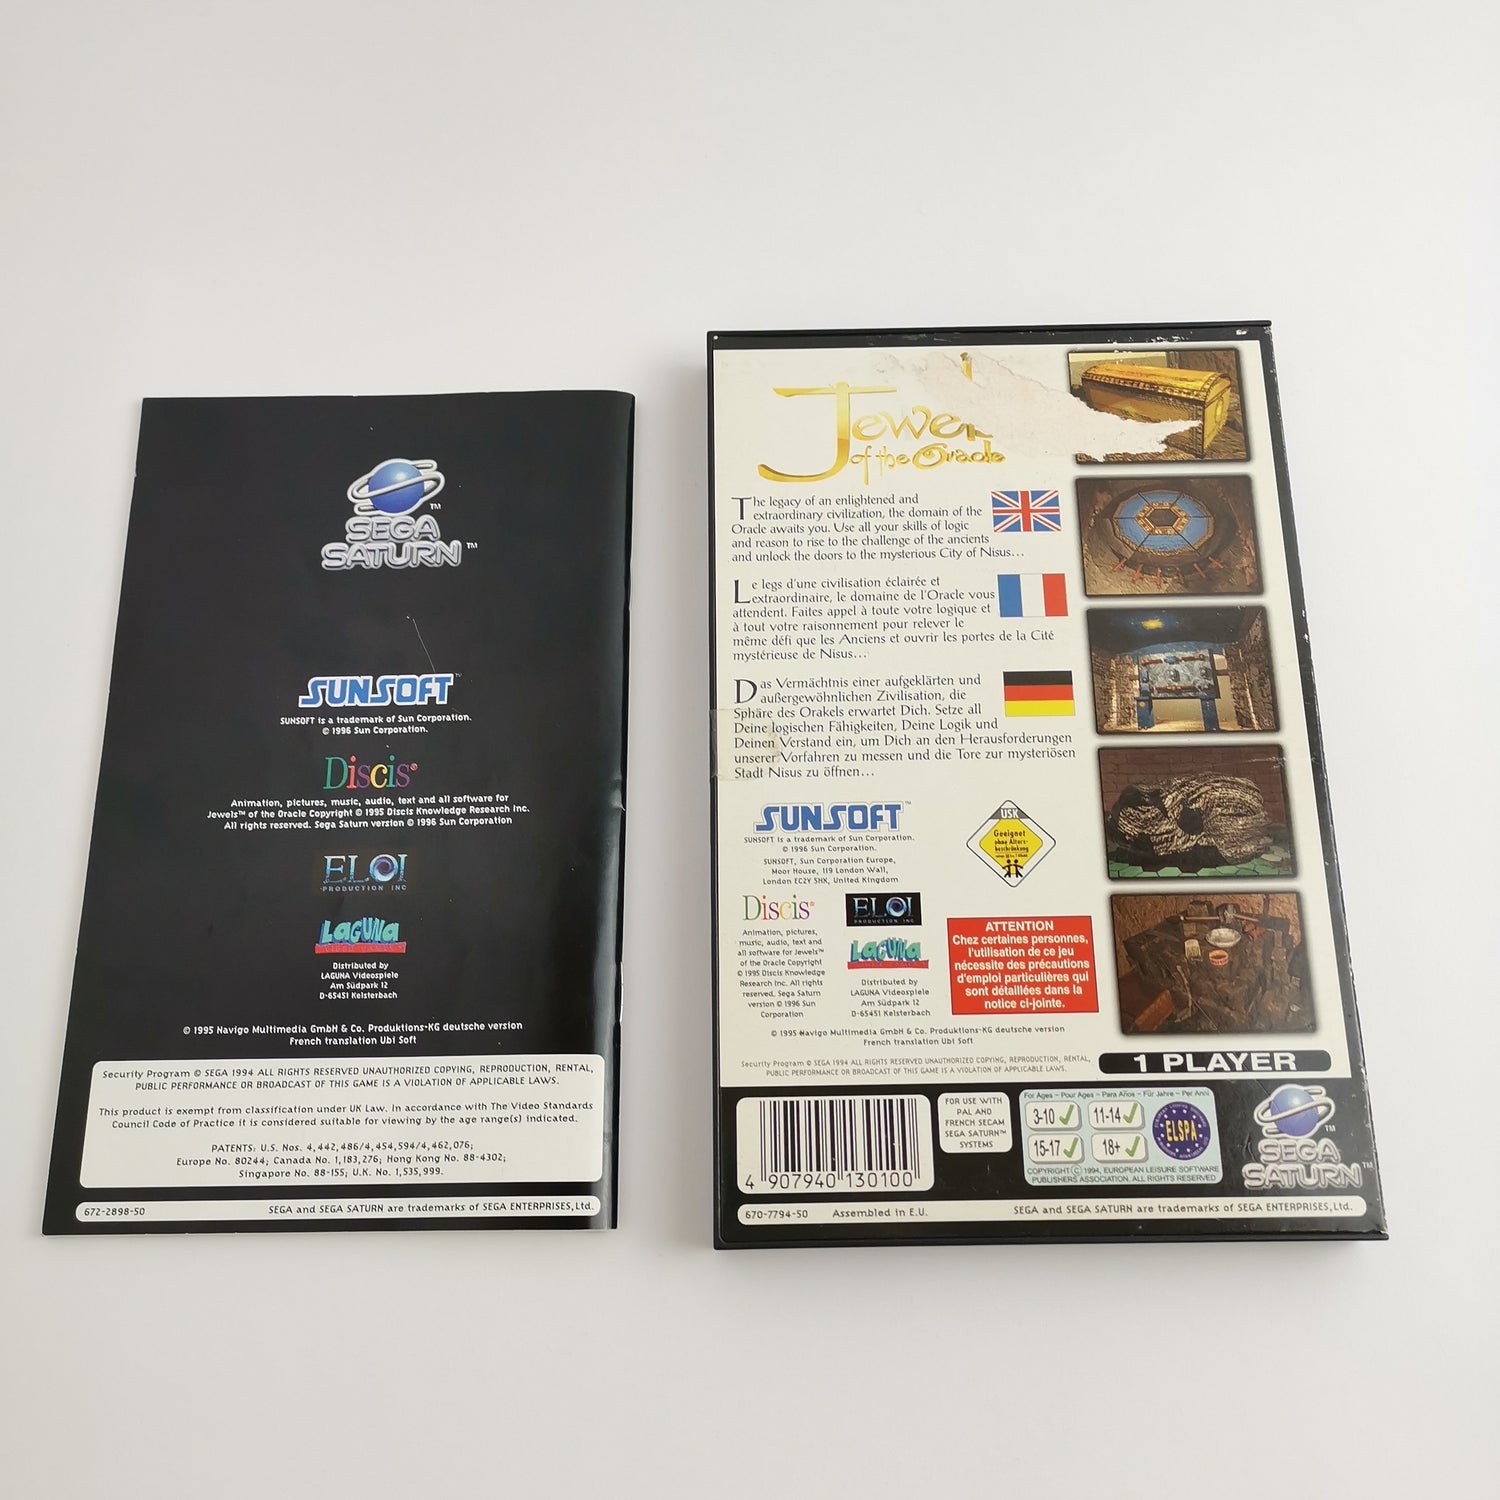 Sega Saturn game: Jewels of the Oracle by Sunsoft - original packaging & instructions | PAL ver